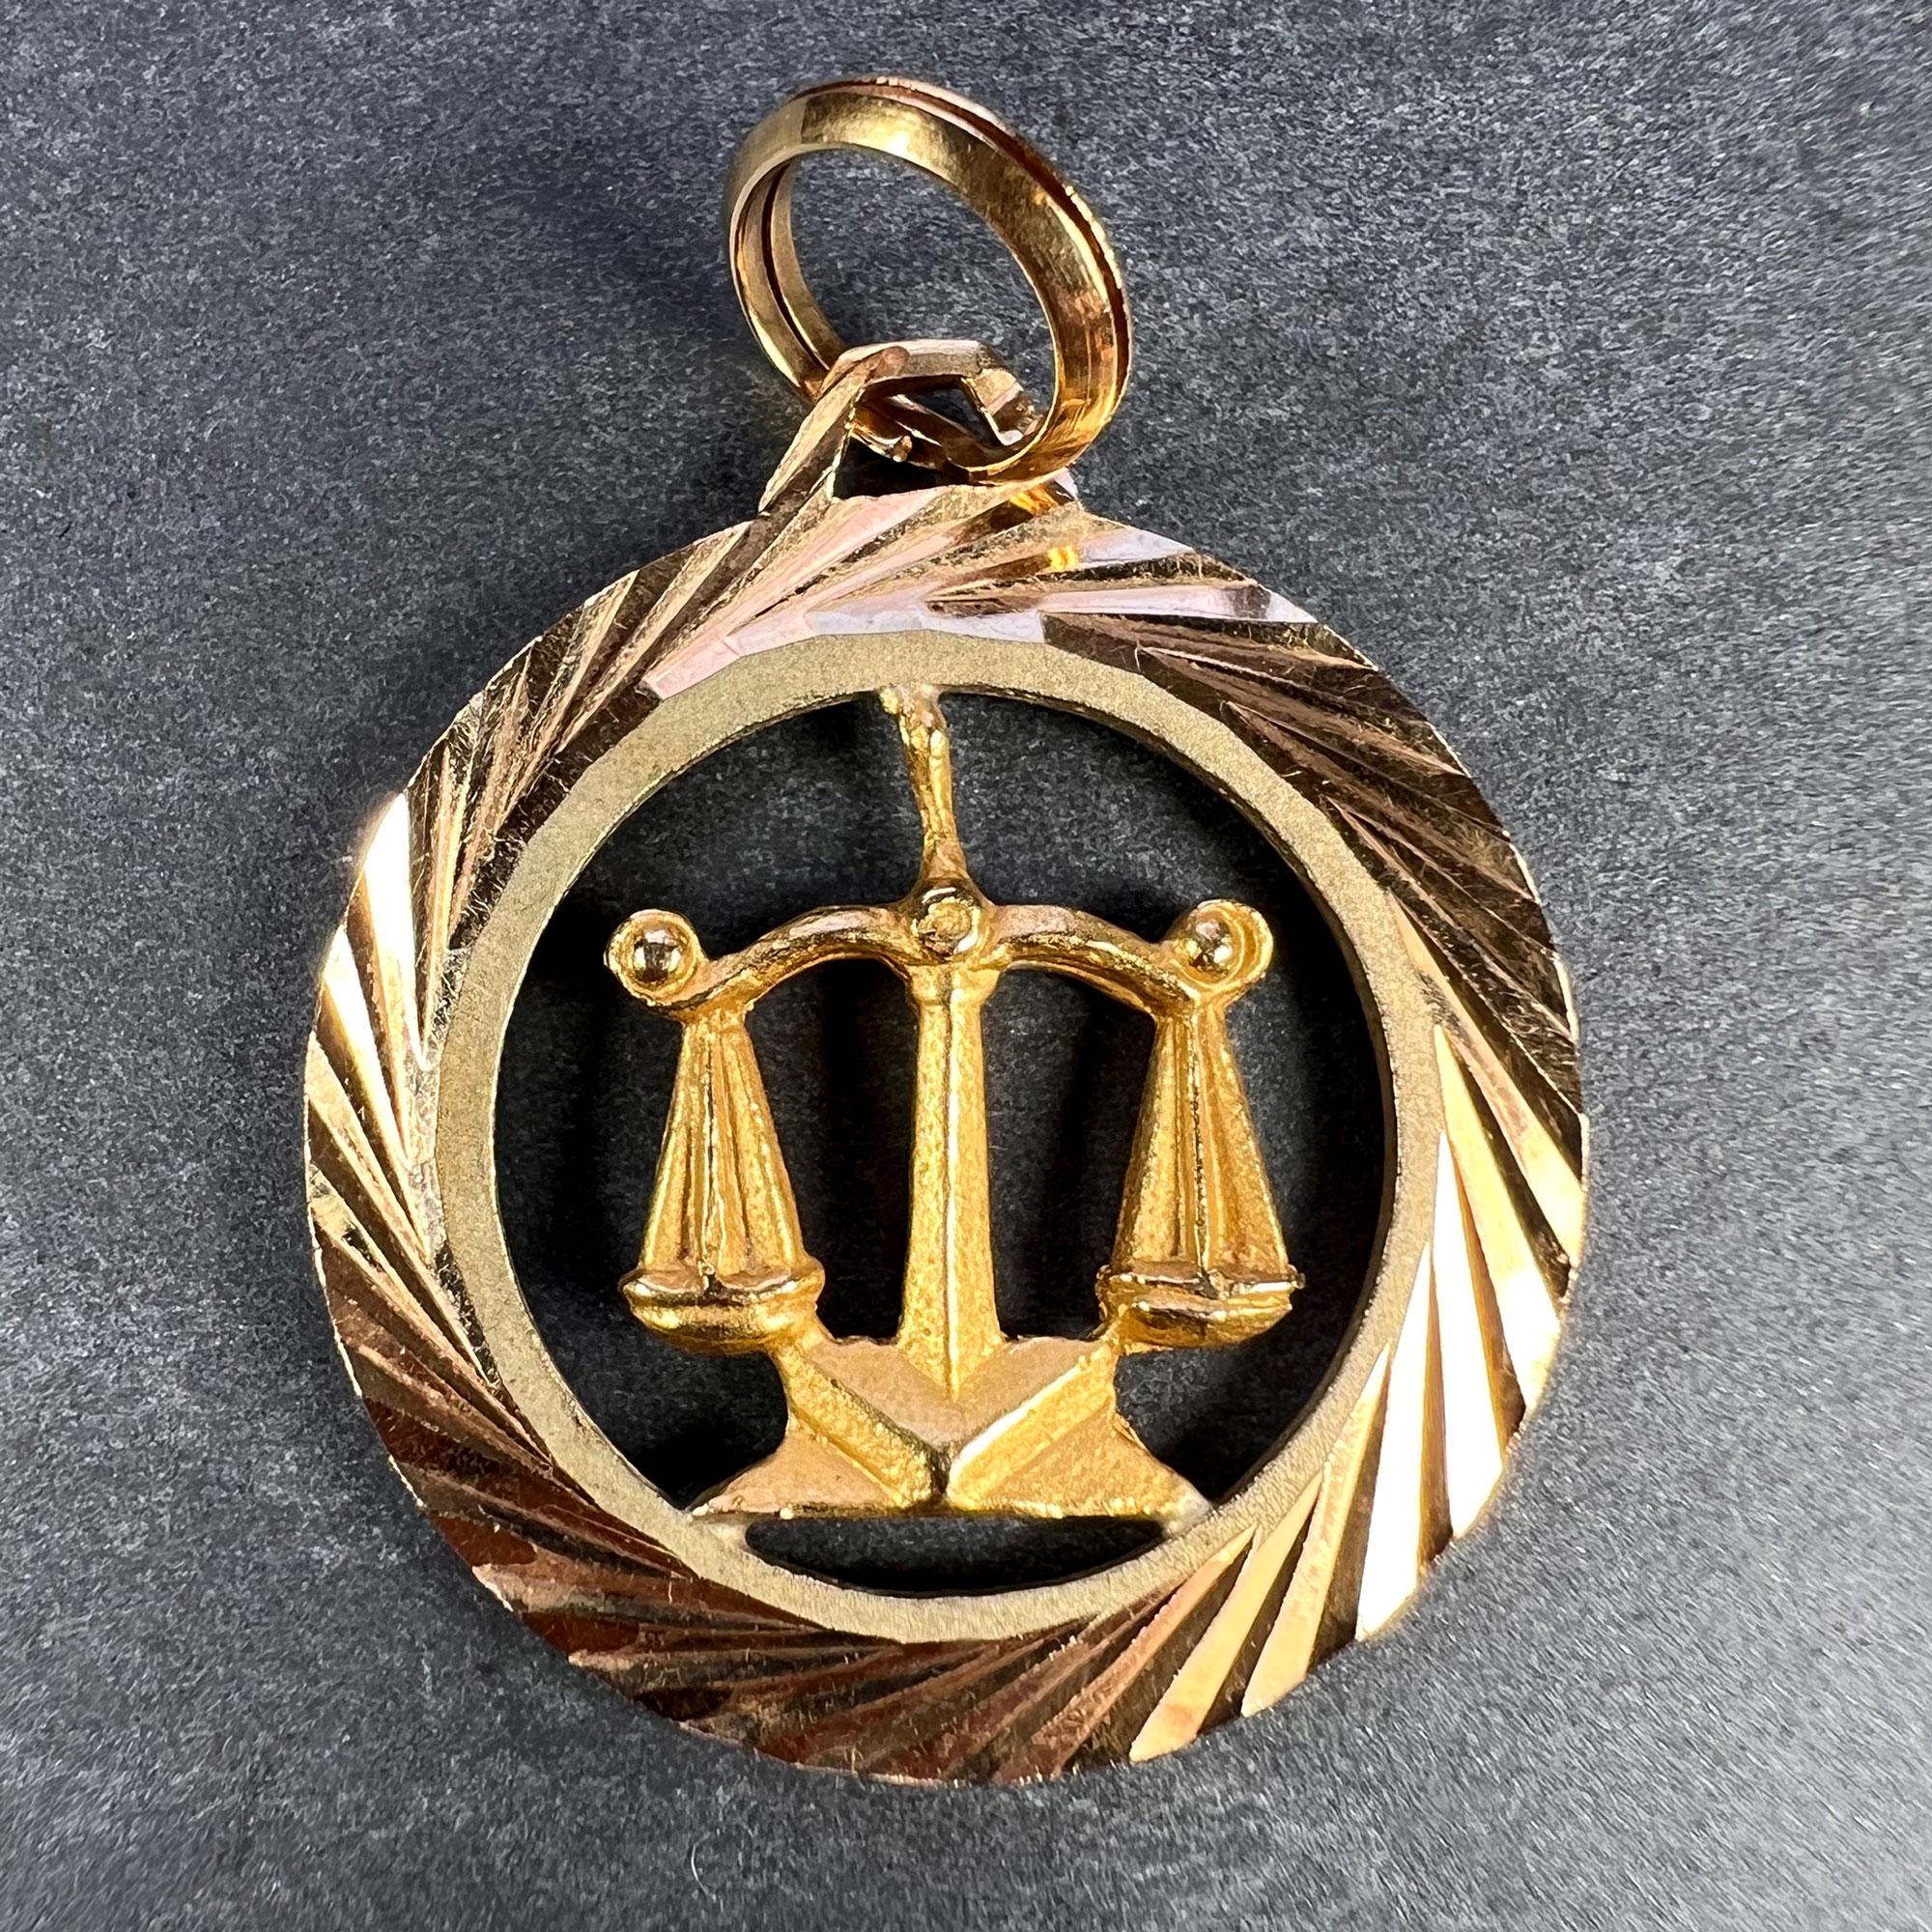 An 18 karat (18K) yellow gold charm pendant designed as a ridged frame surrounding a pair of balance scales representing the zodiac starsign of Libra. Stamped with the owl mark for 18 karat gold and French import.

Dimensions: 2.7 x 2.4 x 0.25 cm